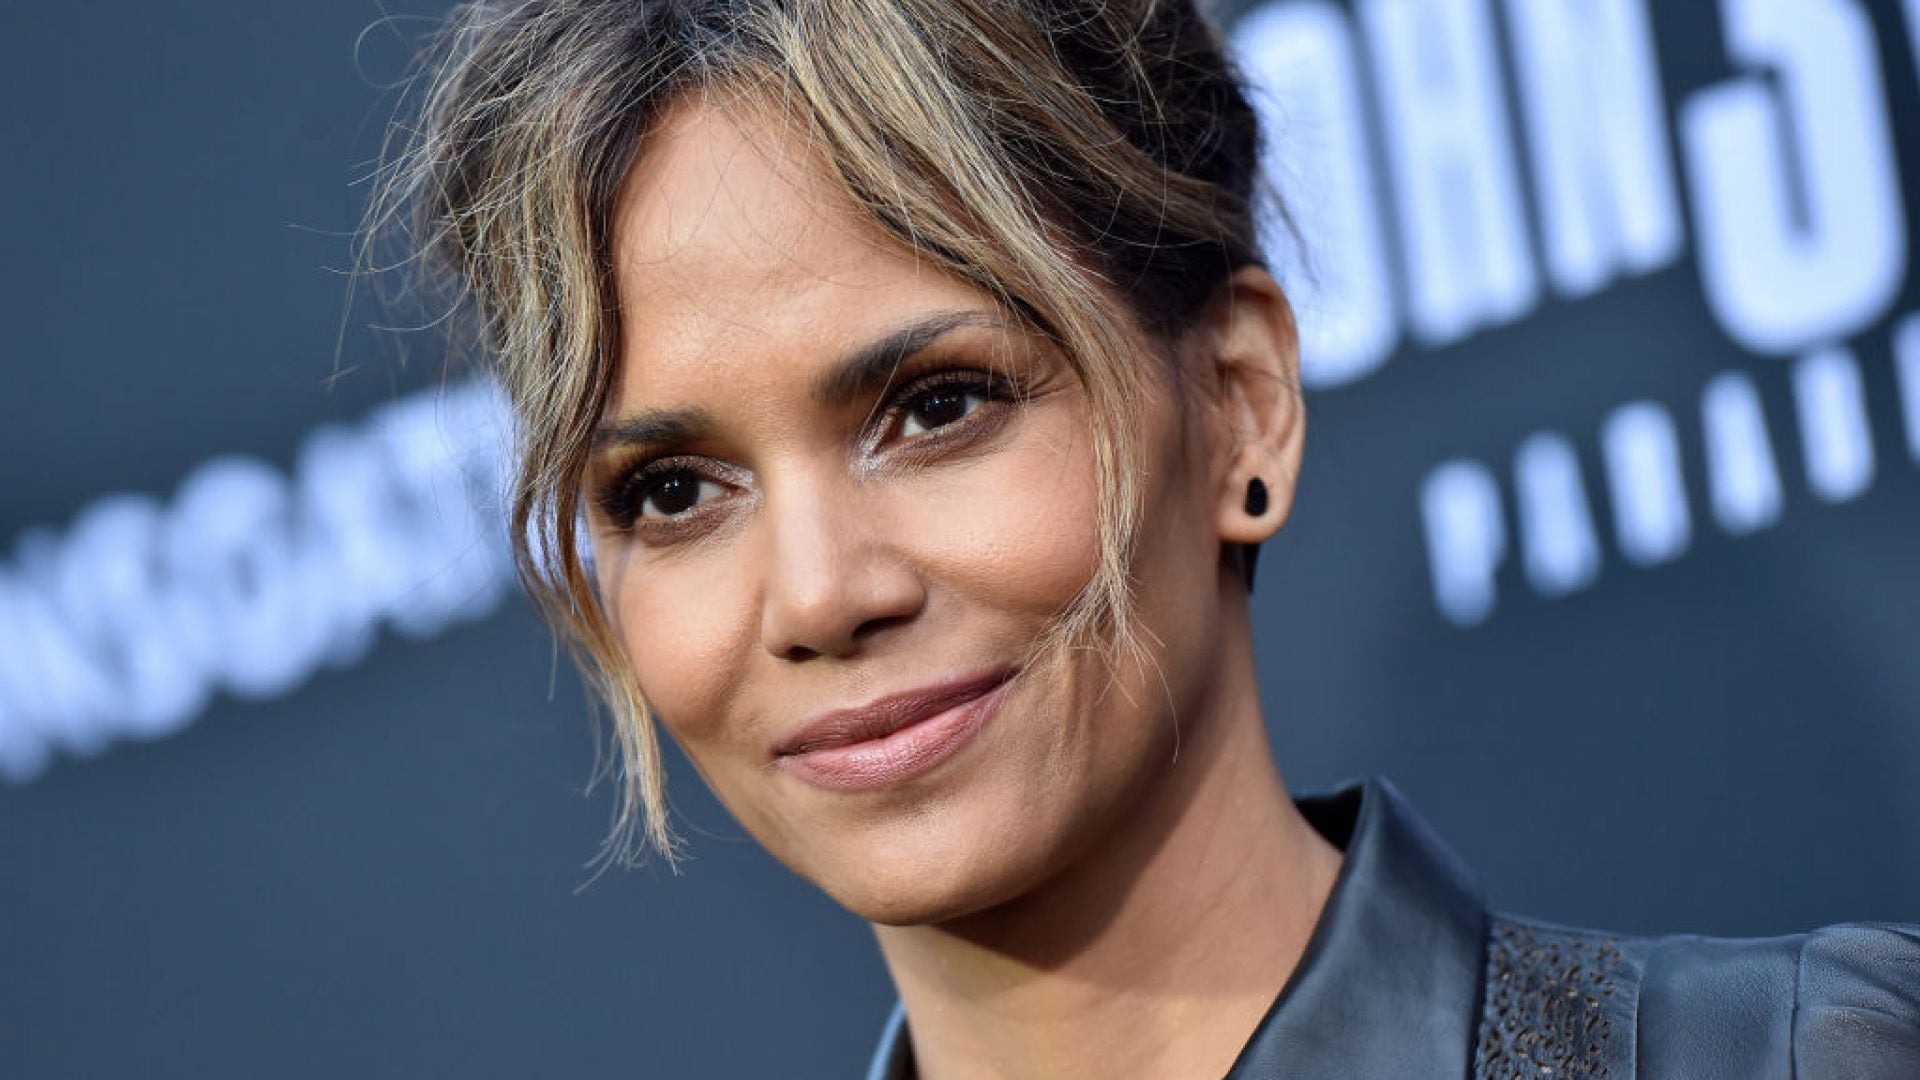 Halle Berry's Directorial Debut ‘Bruised' Sells To Netflix For $20 Million 